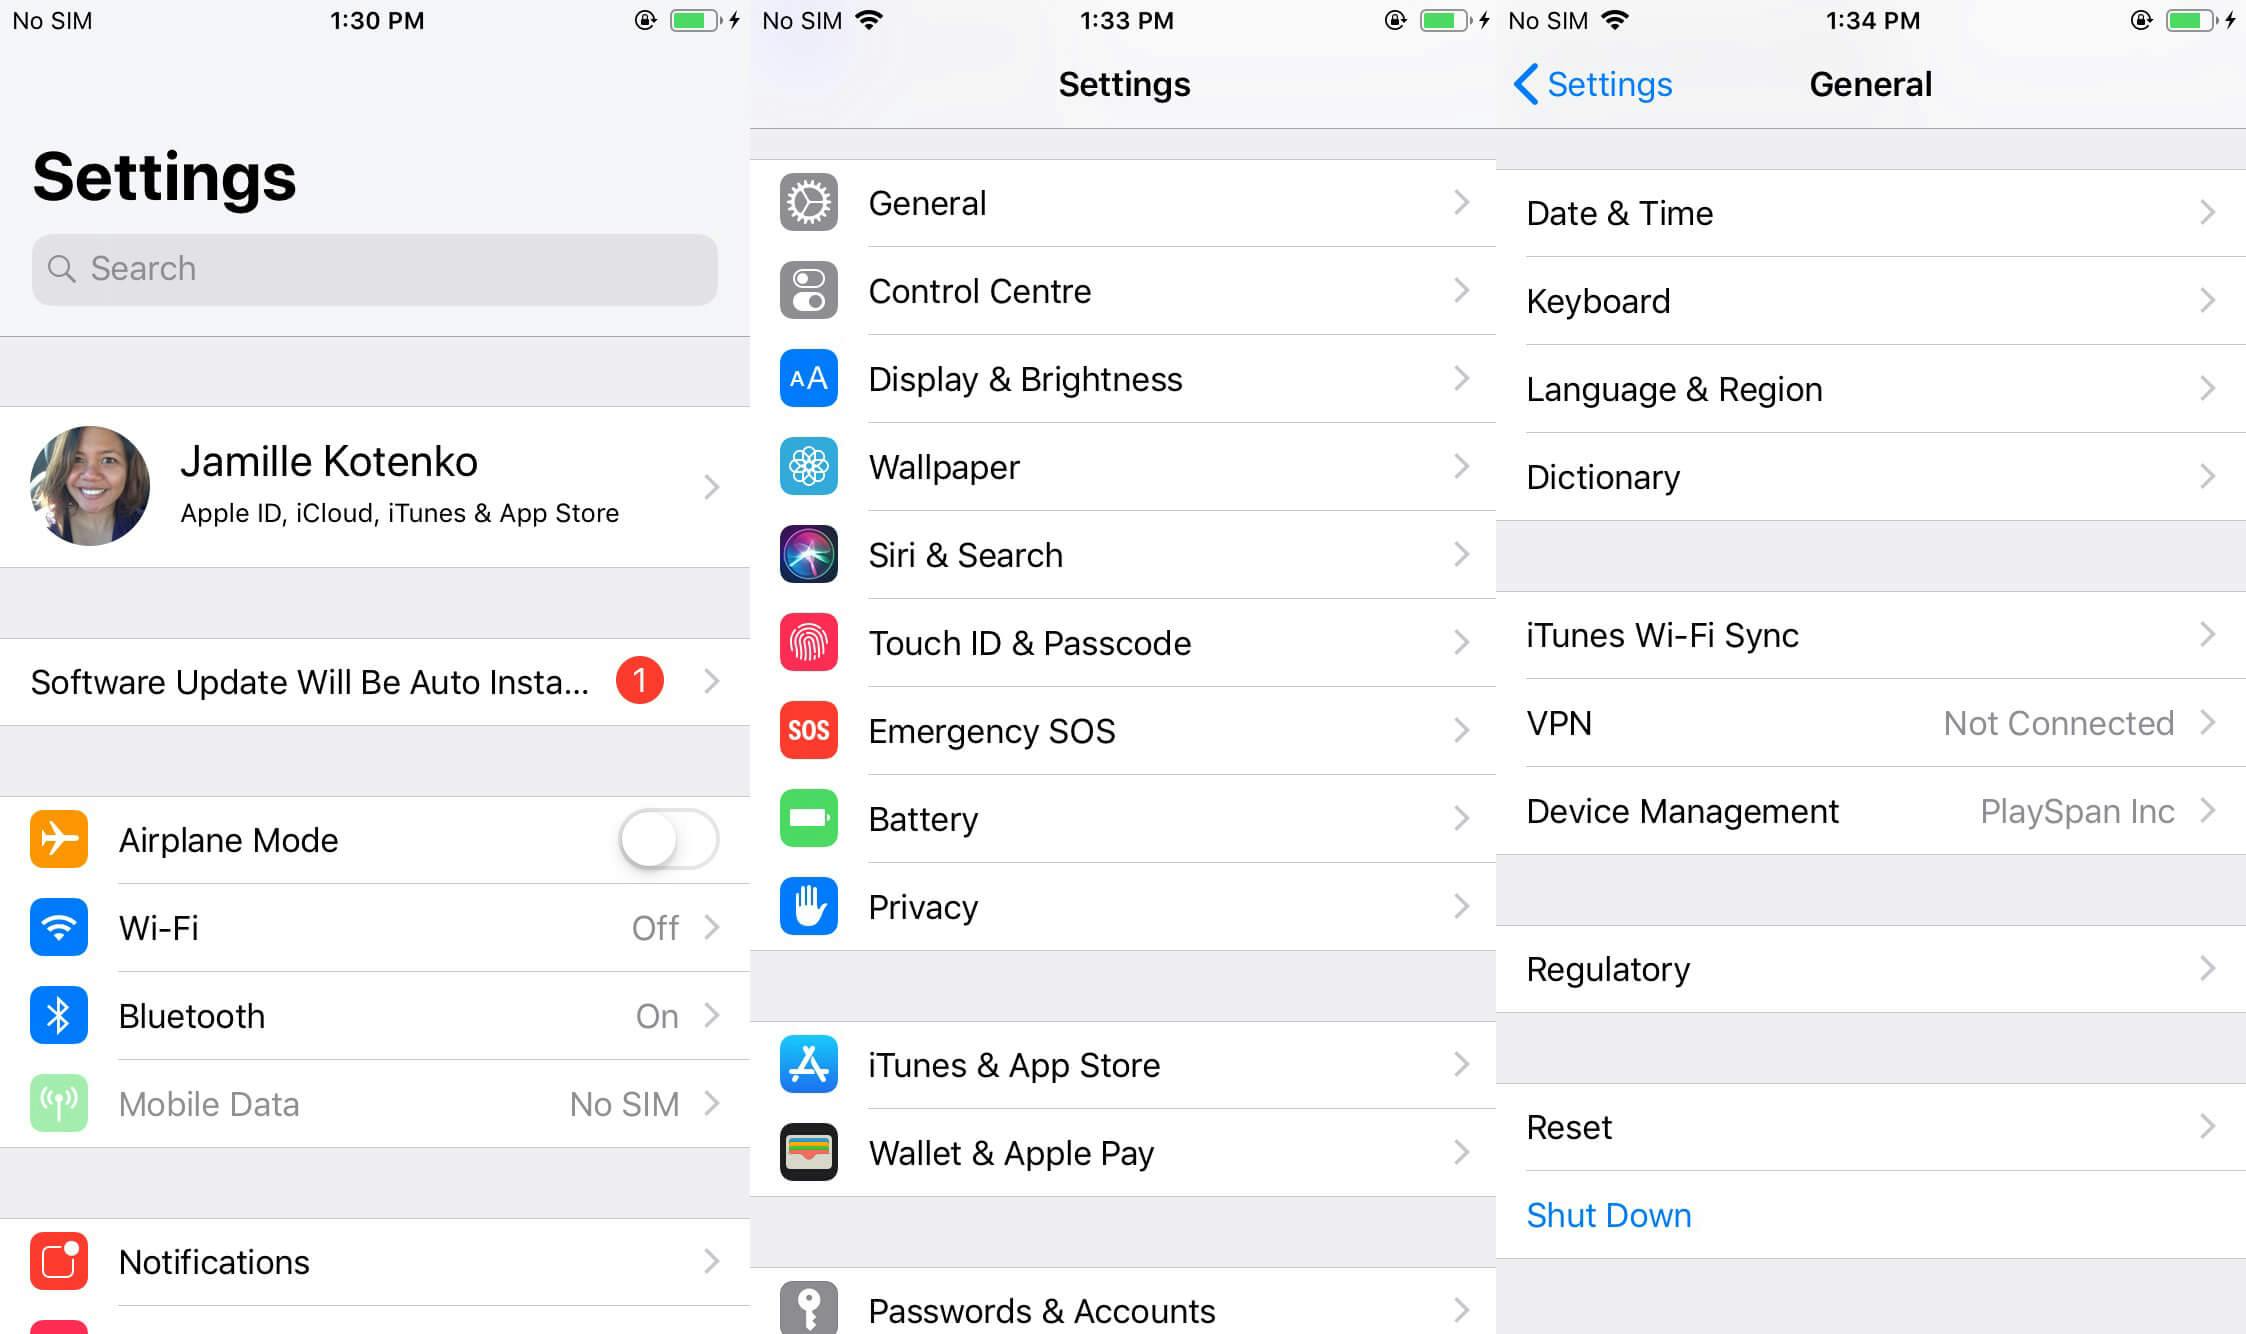 restore iphone to factory settings